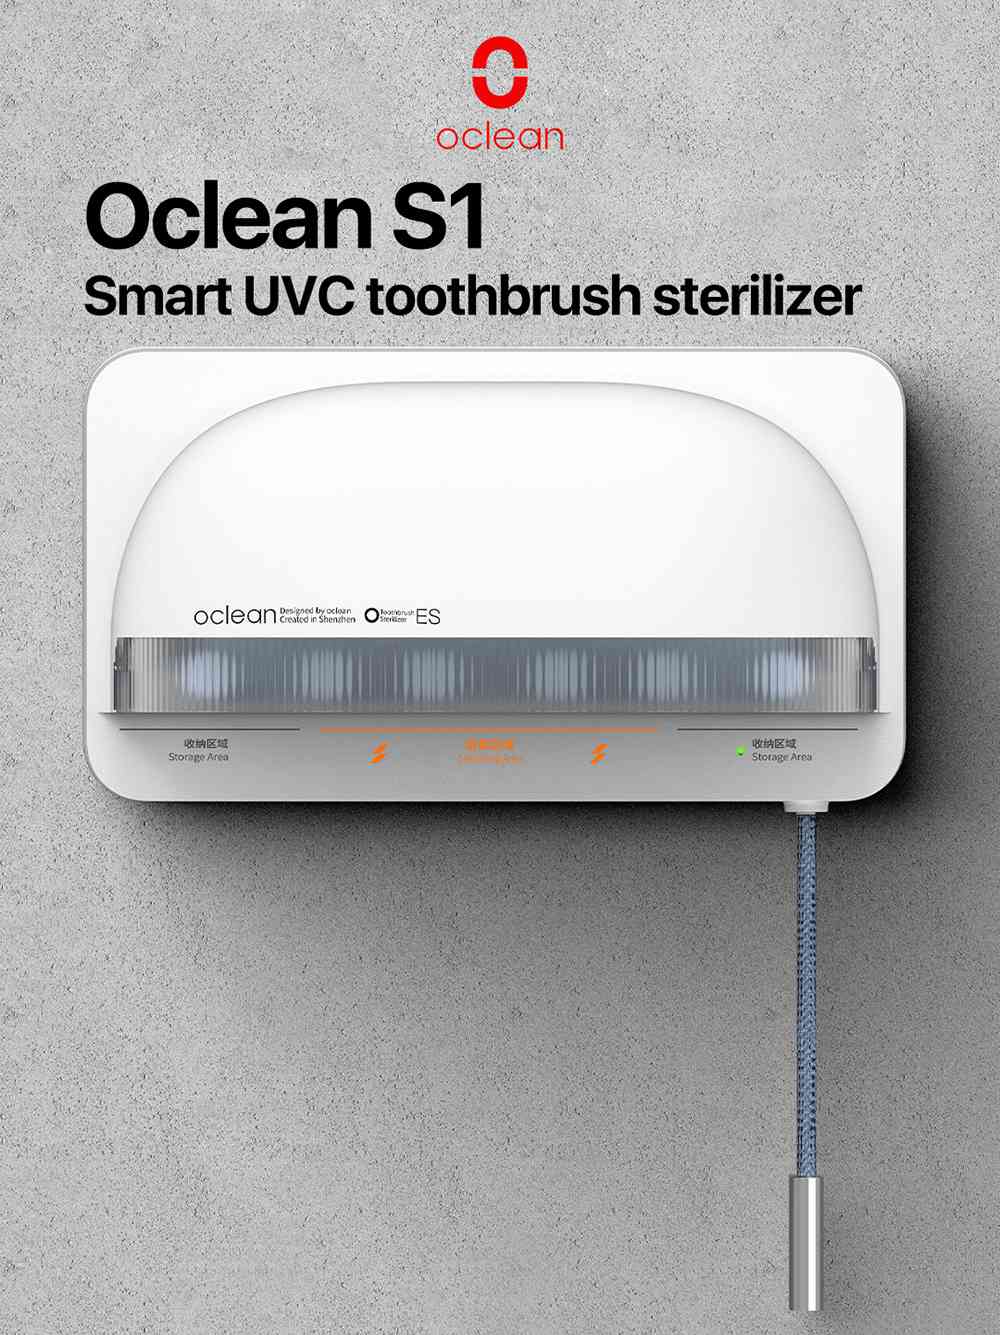 Oclean S1 Smart UVC Toothbrush Sterilizer Wall Mounted Holder Rack Manual Automatic Sterilizer Ultraviolet Antibacterial Holder from Xiaomi Youpin - White